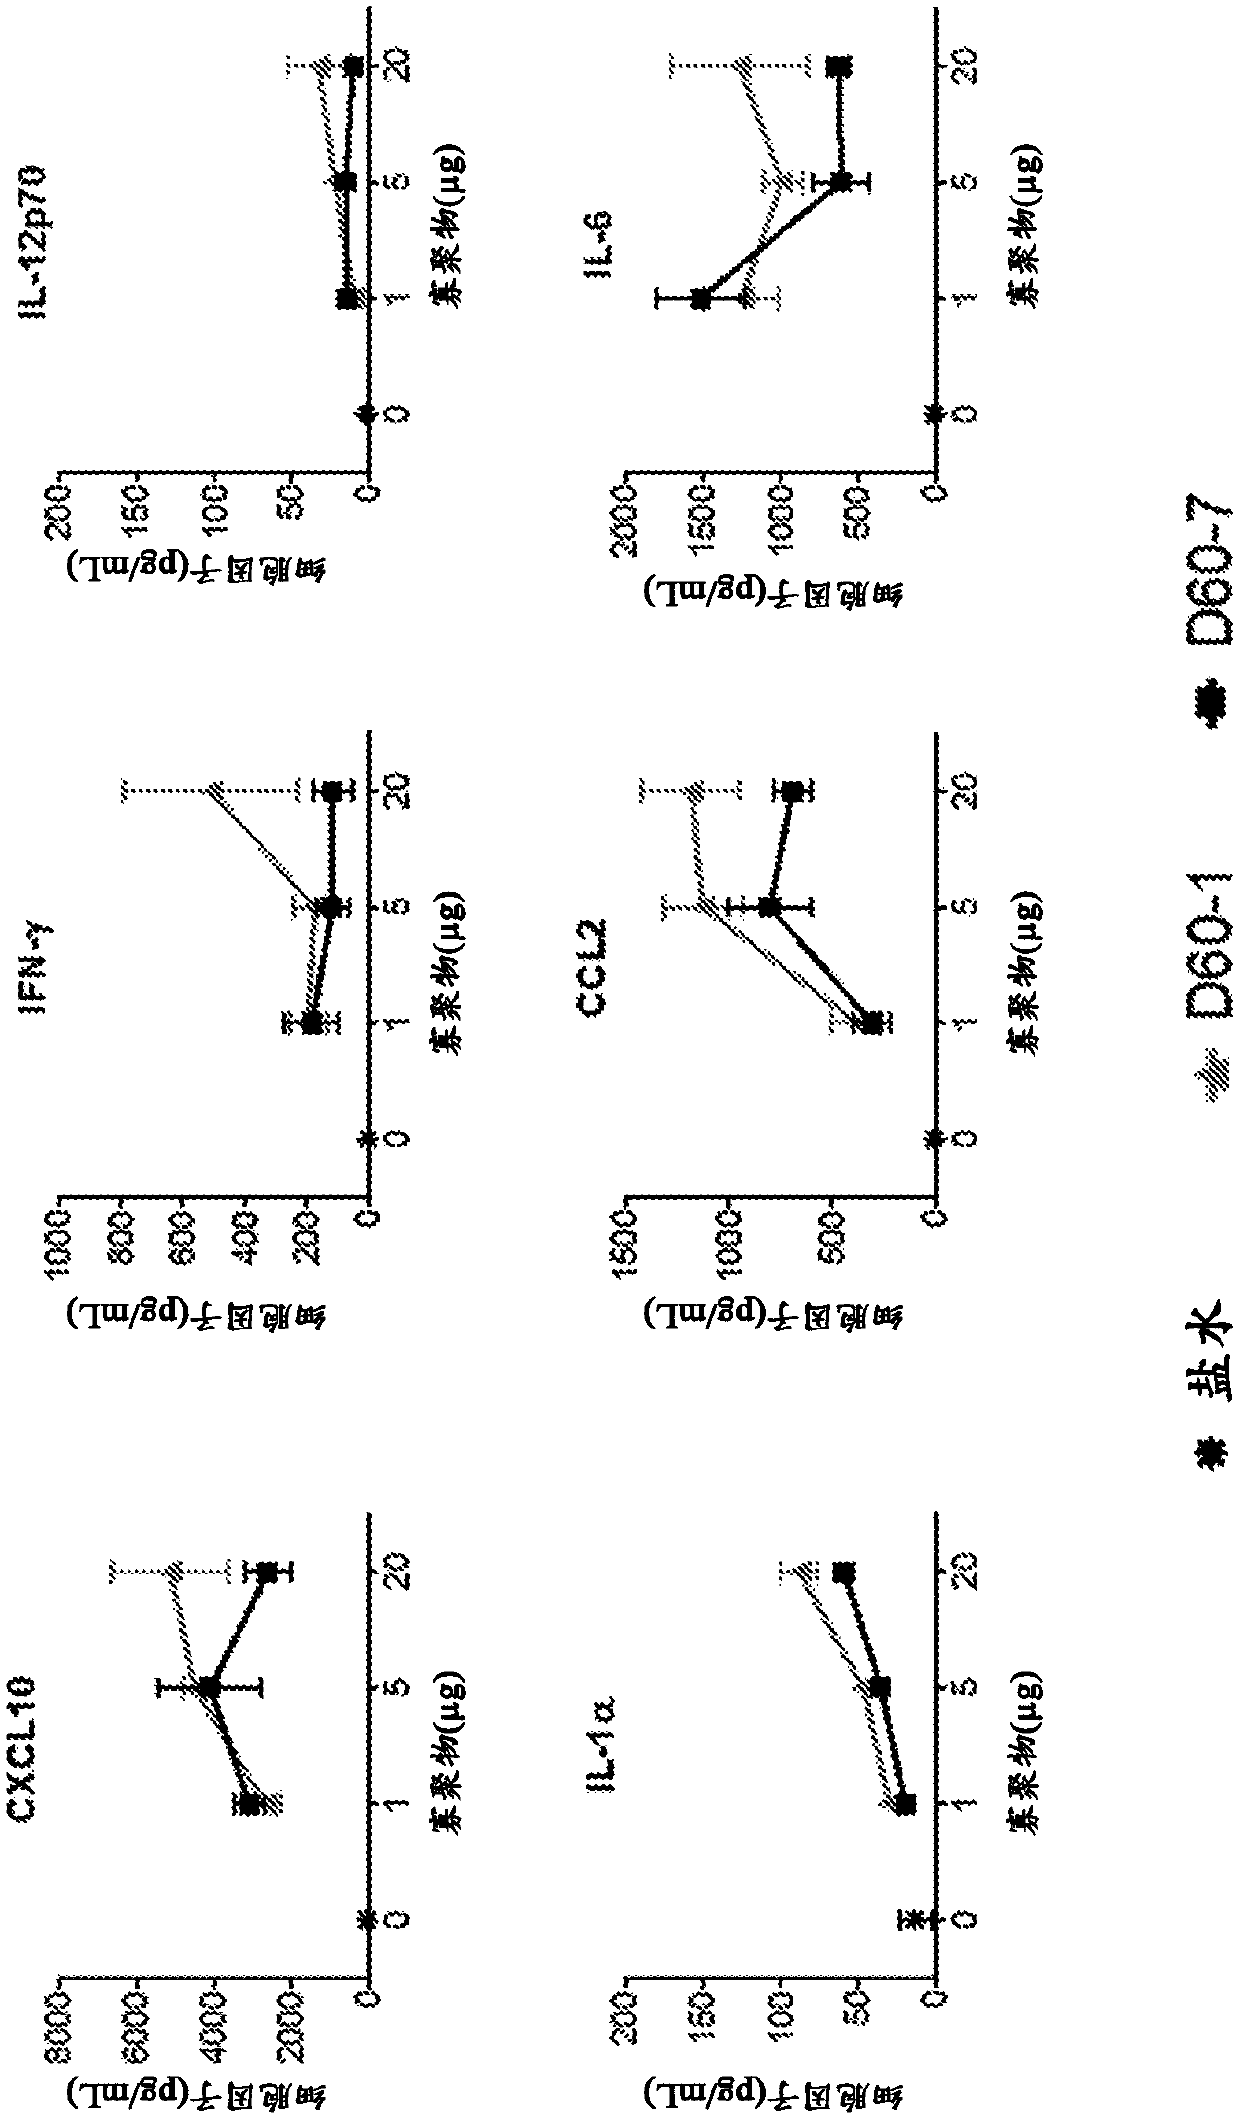 Intrapulmonary Administration Of Polynucleotide Toll-Like Receptor 9 Agonists For Treating Cancer Of The Lung